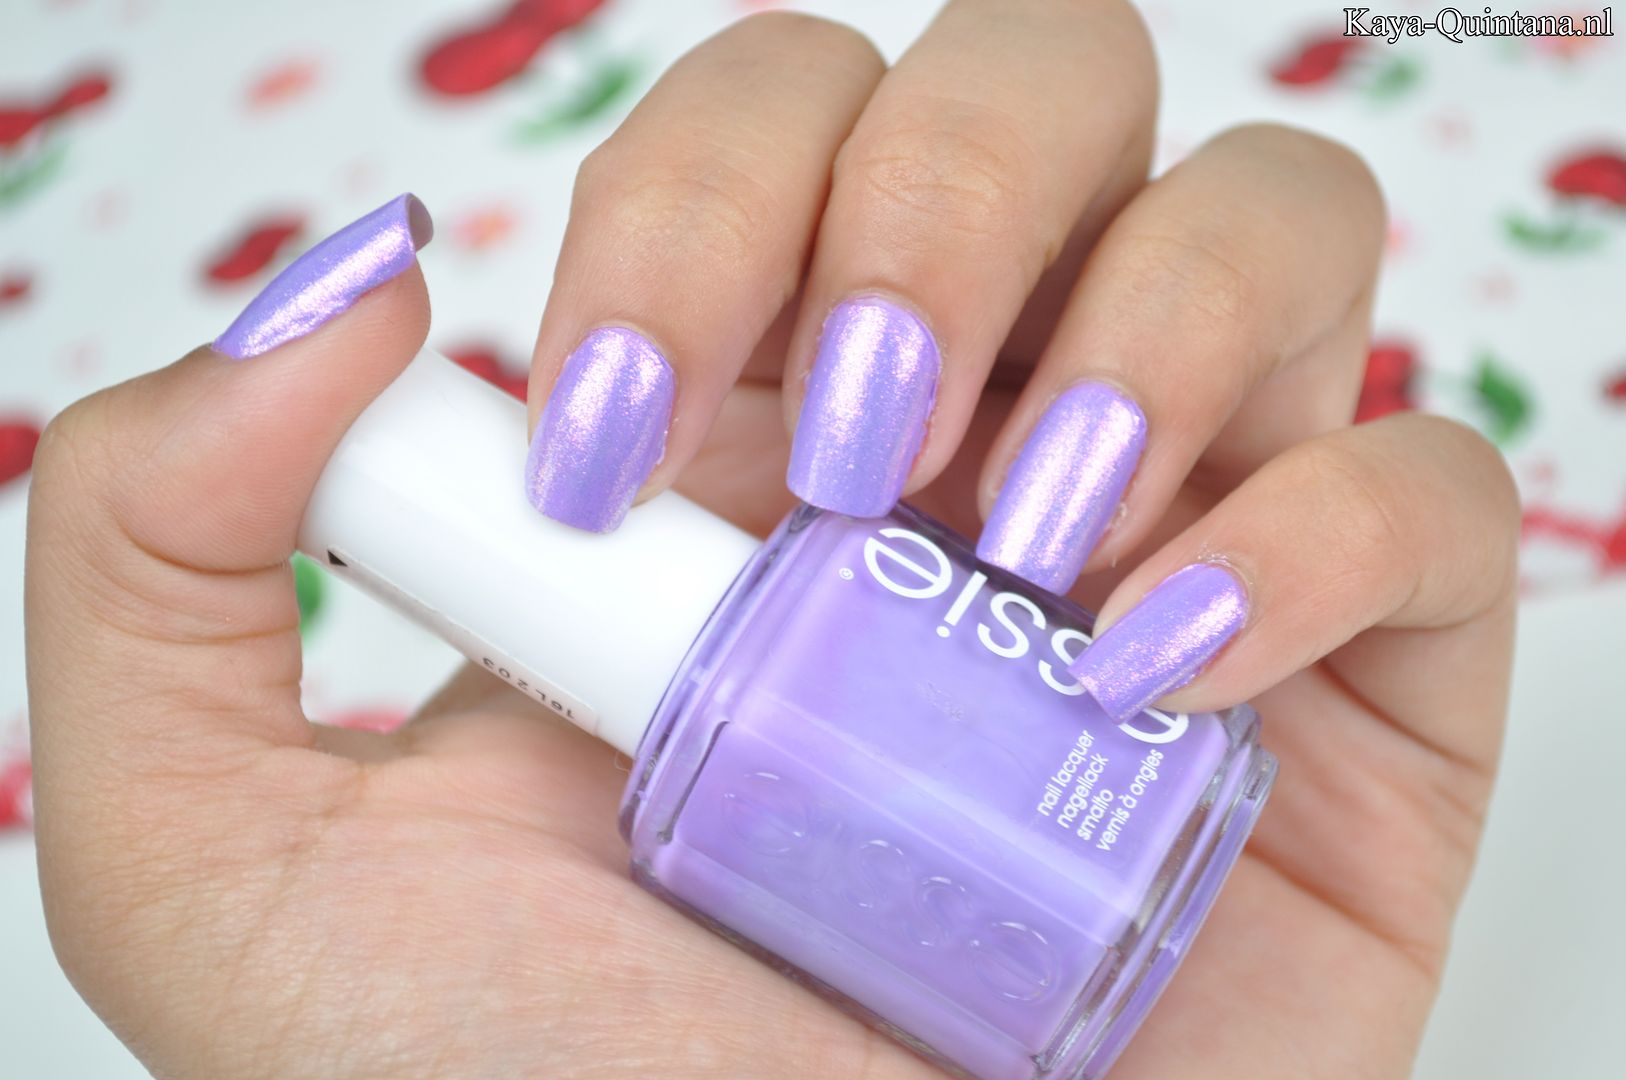 essence effect nail polish in pixie dust